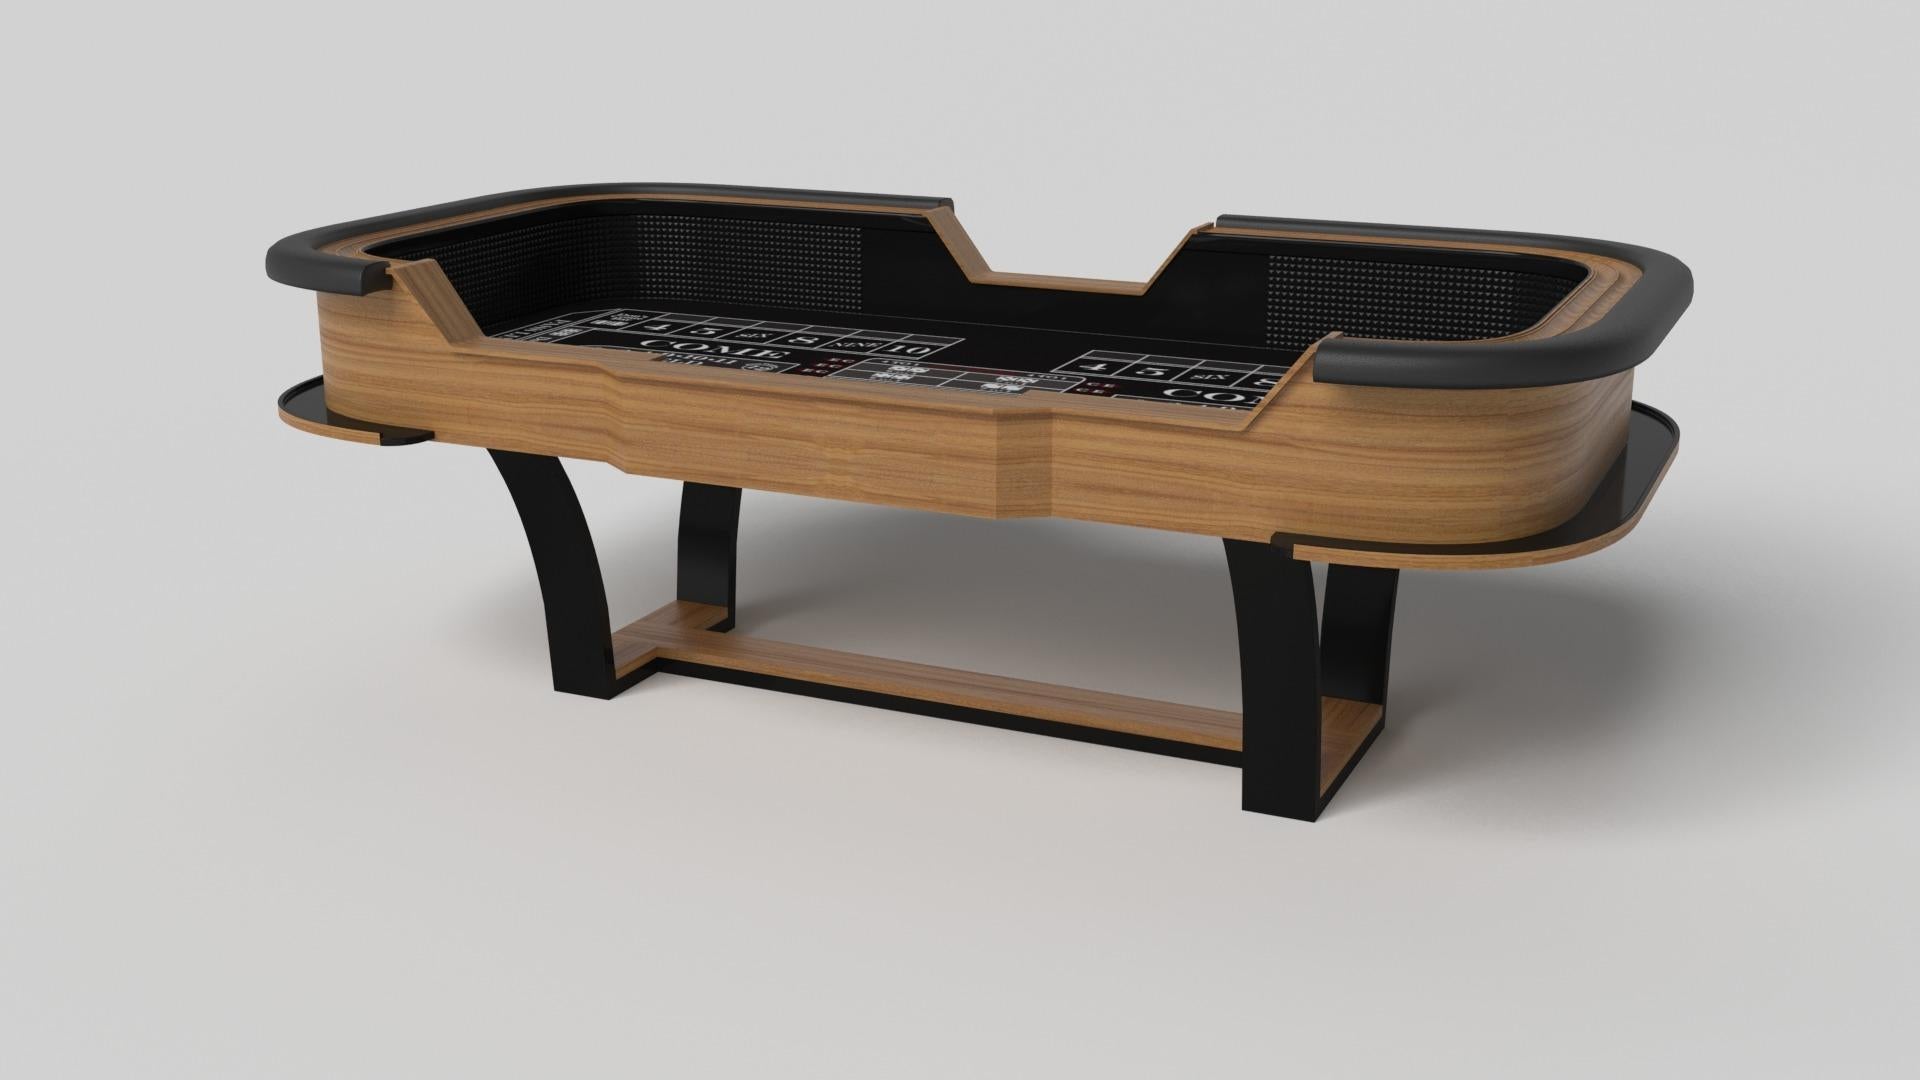 With an I-shaped metal base, slightly sloped metal legs, and a contrasting wood top, the Elite craps table exudes modern sophistication while evoking a sense of art deco design. This table is a confluence of style, made to meet today's demands and